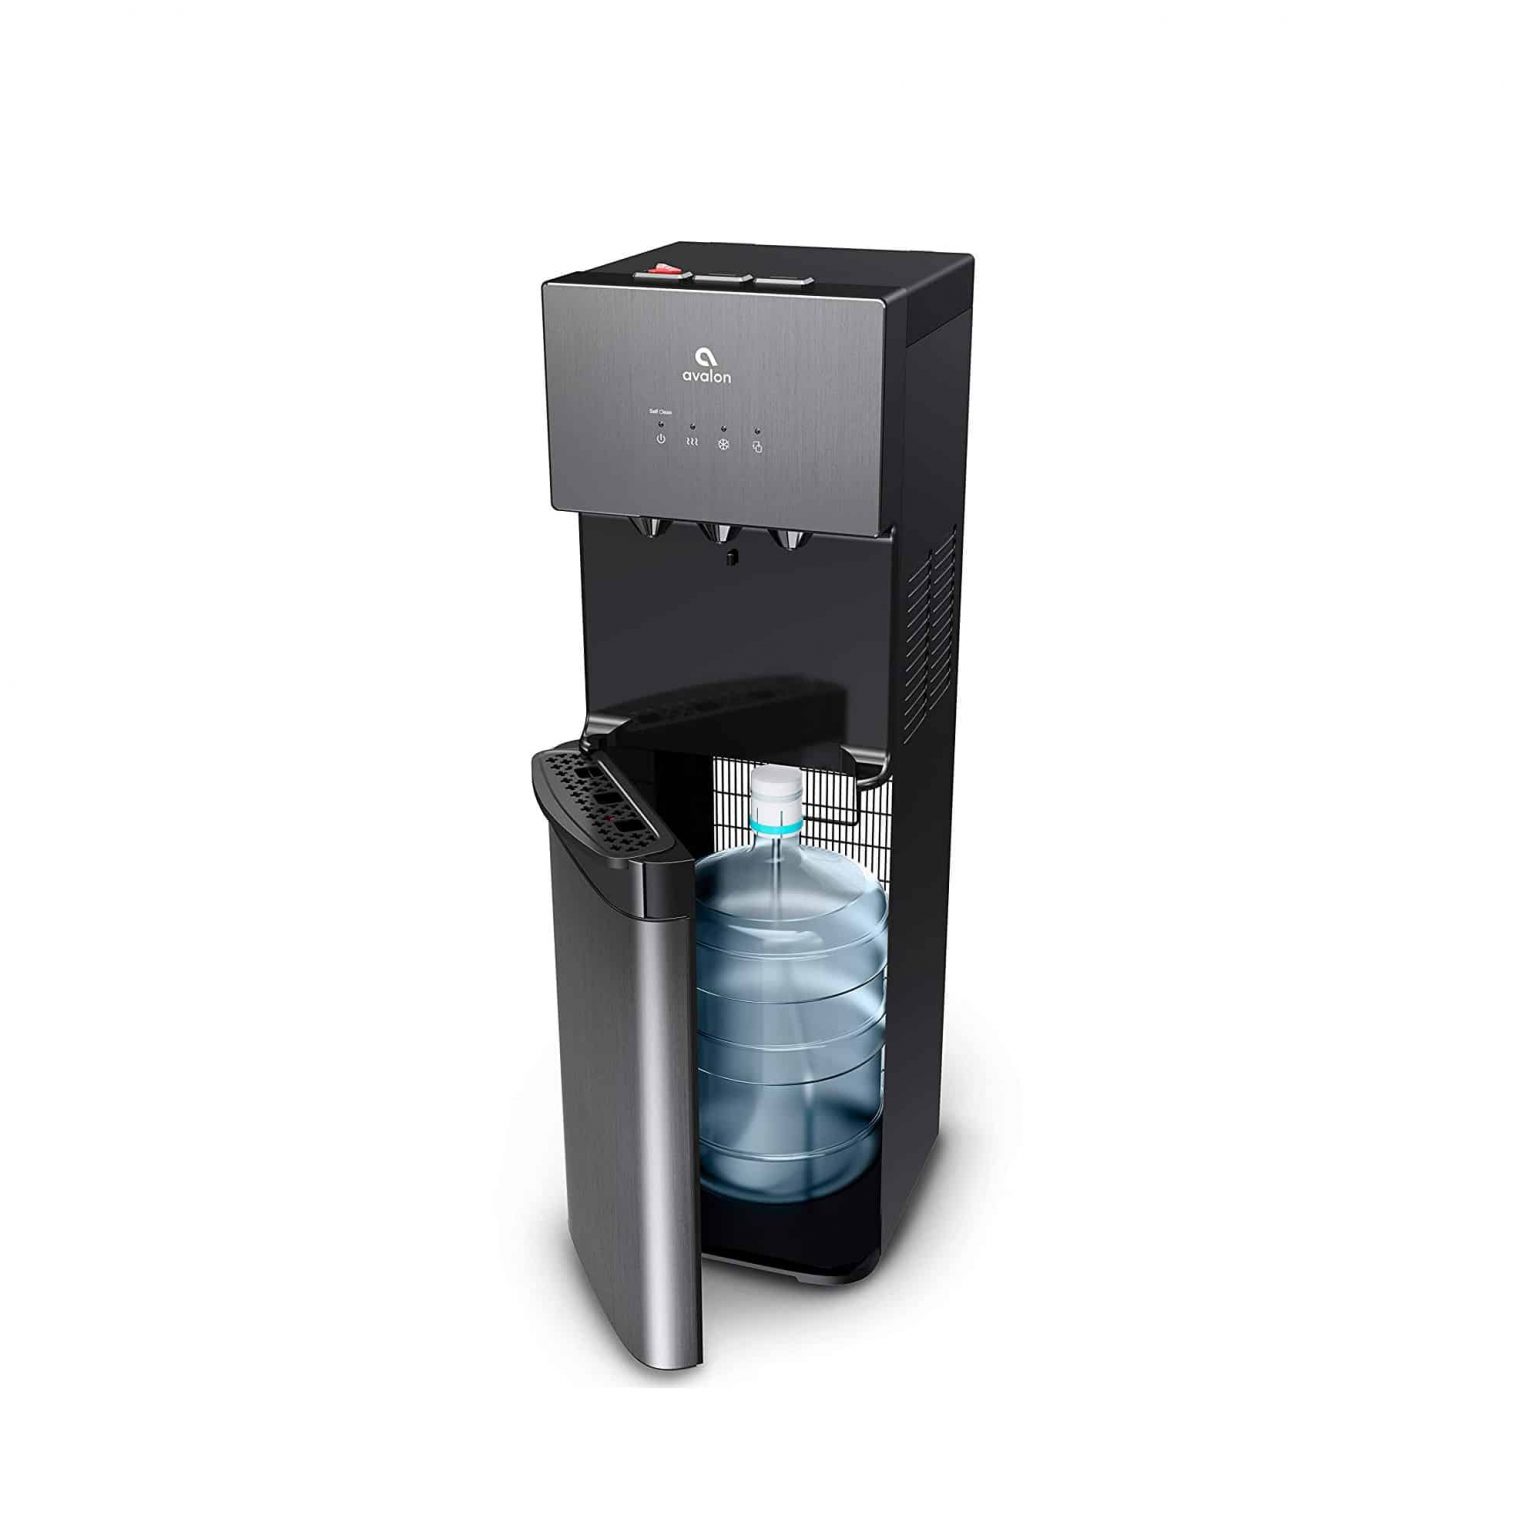 Top 10 Best Water Dispensers in 2021 Reviews | Buyer's Guide